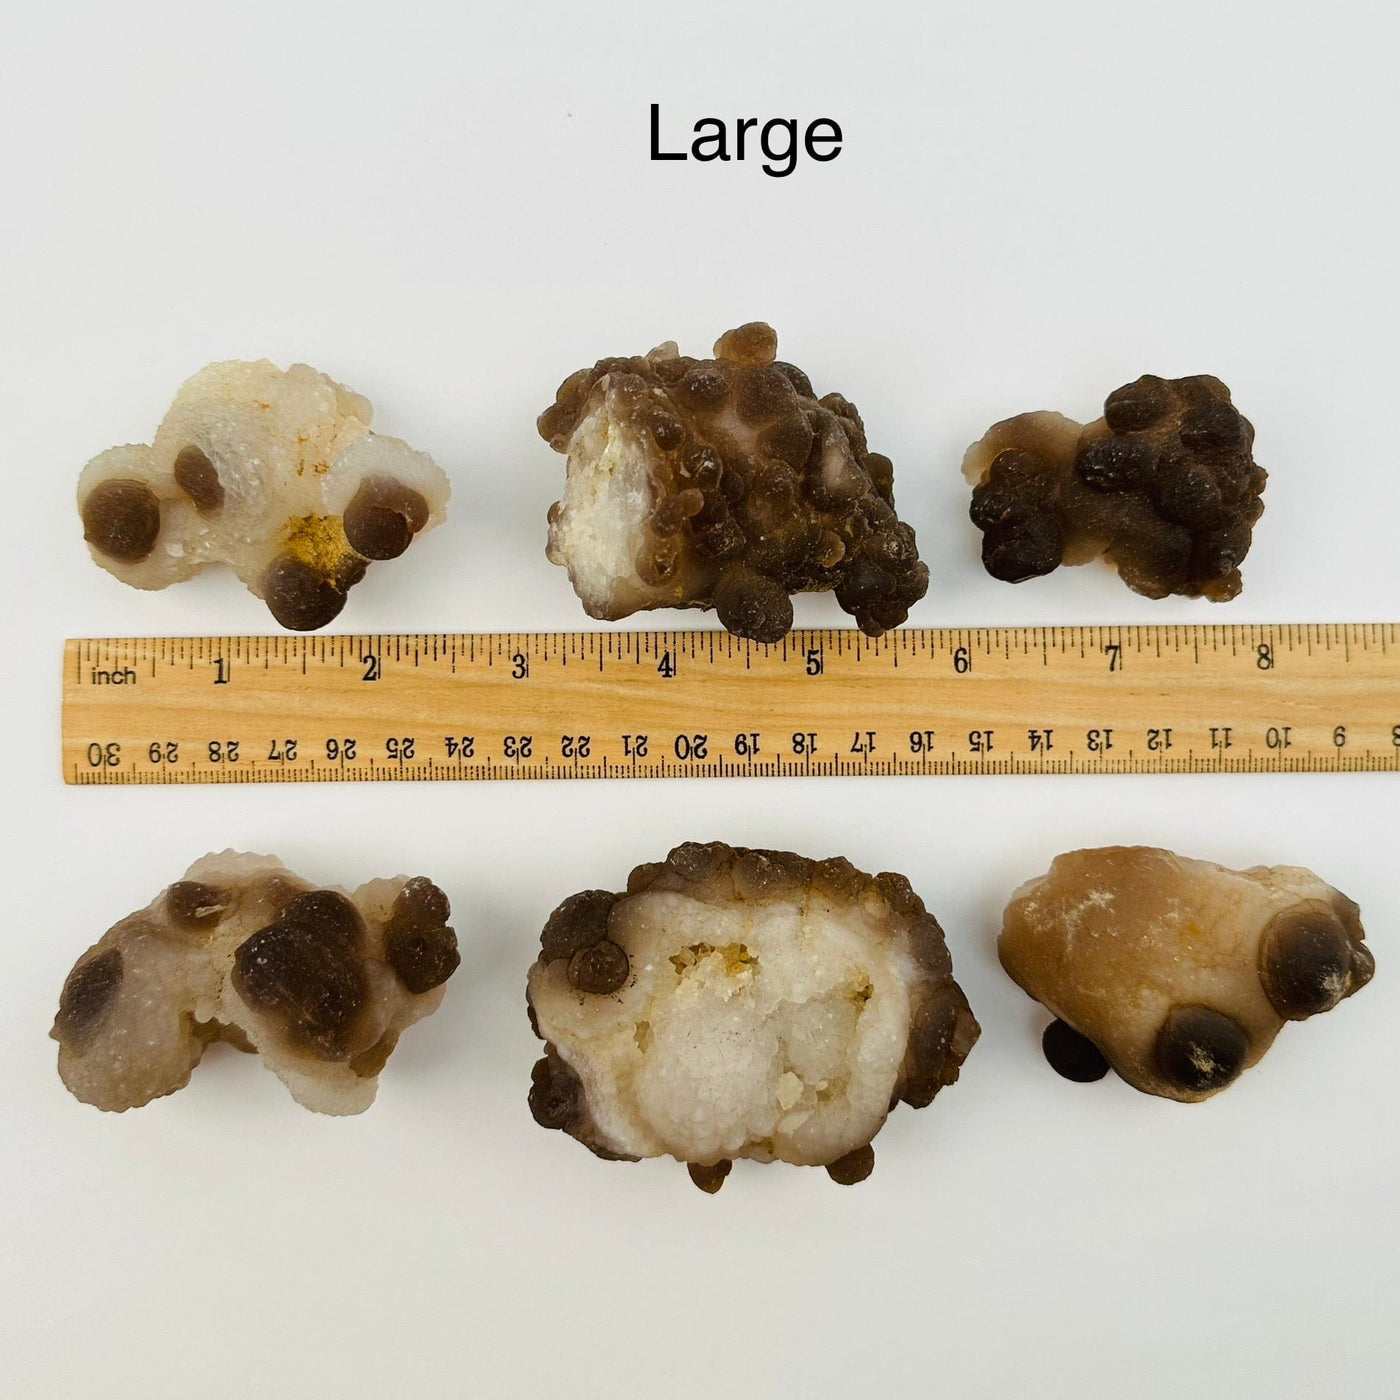 Botryoidal Chalcedony - Rough and Natural Chalcedony - By Size - large pieces next to a ruler for size reference 